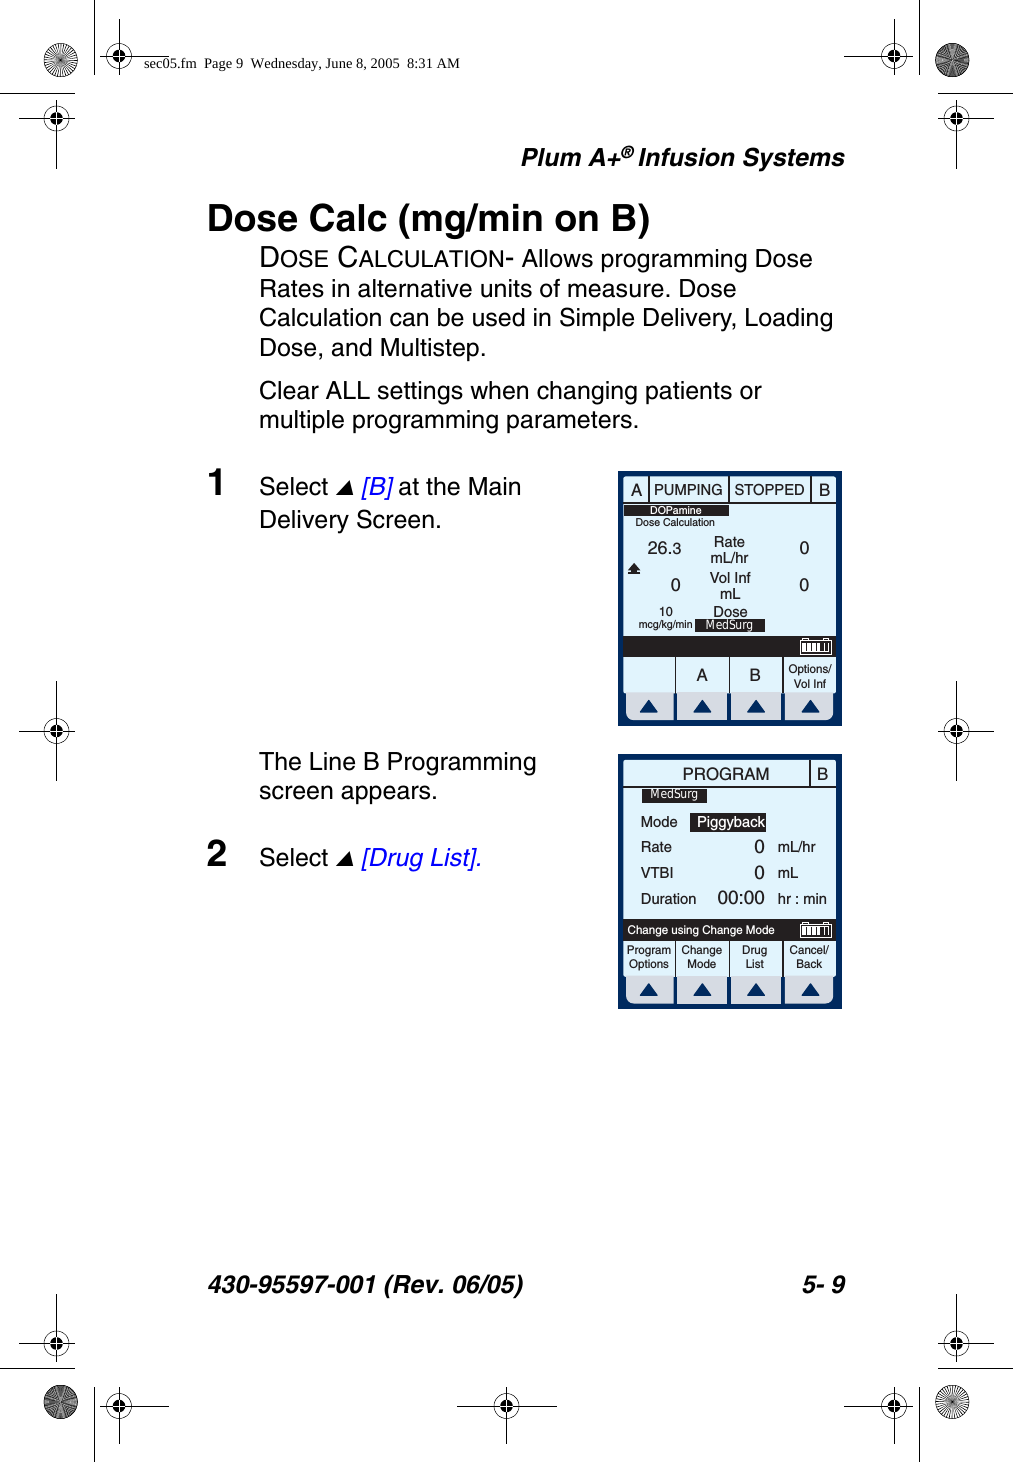 Plum A+® Infusion Systems430-95597-001 (Rev. 06/05) 5- 9Dose Calc (mg/min on B)DOSE CALCULATION- Allows programming Dose Rates in alternative units of measure. Dose Calculation can be used in Simple Delivery, Loading Dose, and Multistep.Clear ALL settings when changing patients or multiple programming parameters.1Select  [B] at the Main Delivery Screen.The Line B Programming screen appears.2Select  [Drug List].AABBPUMPING STOPPEDRatemL/hrVol InfmLOptions/Vol Inf26.300010mcg/kg/minDOPamineMedSurgDoseDose CalculationBPROGRAMModeRateVTBIDurationmL/hrmLhr : minProgramOptionsChangeModeCancel/BackChange using Change ModePiggyback0000:00MedSurgDrug Listsec05.fm  Page 9  Wednesday, June 8, 2005  8:31 AM